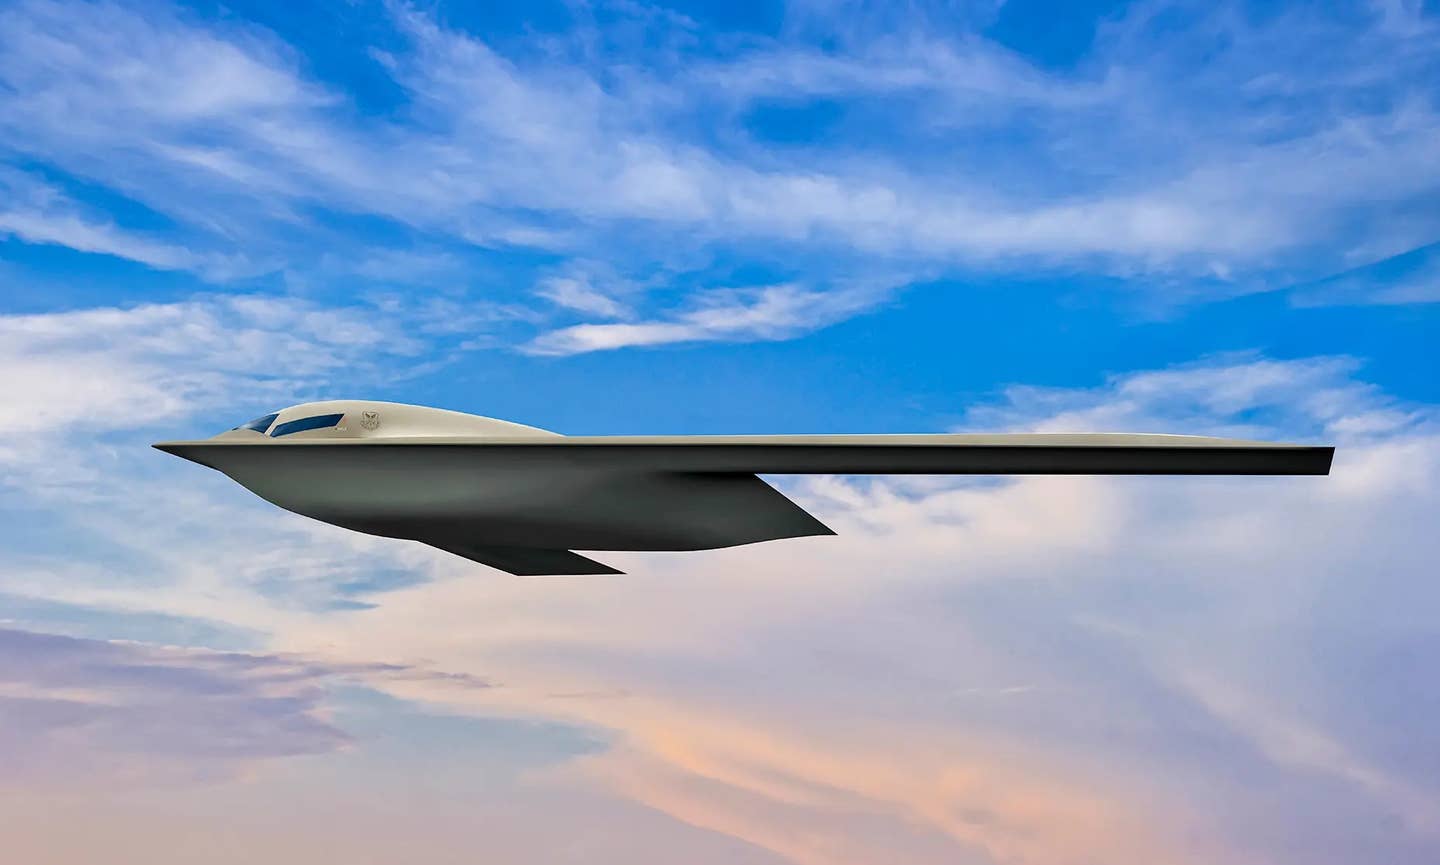 Experience of past programs has shaped the approach to the B-21 bomber program. This has been tailored to avoid the requirements creep, spiraling costs, and massive developmental timetables that have characterized some previous big-ticket programs. <em>U.S. Air Force</em>